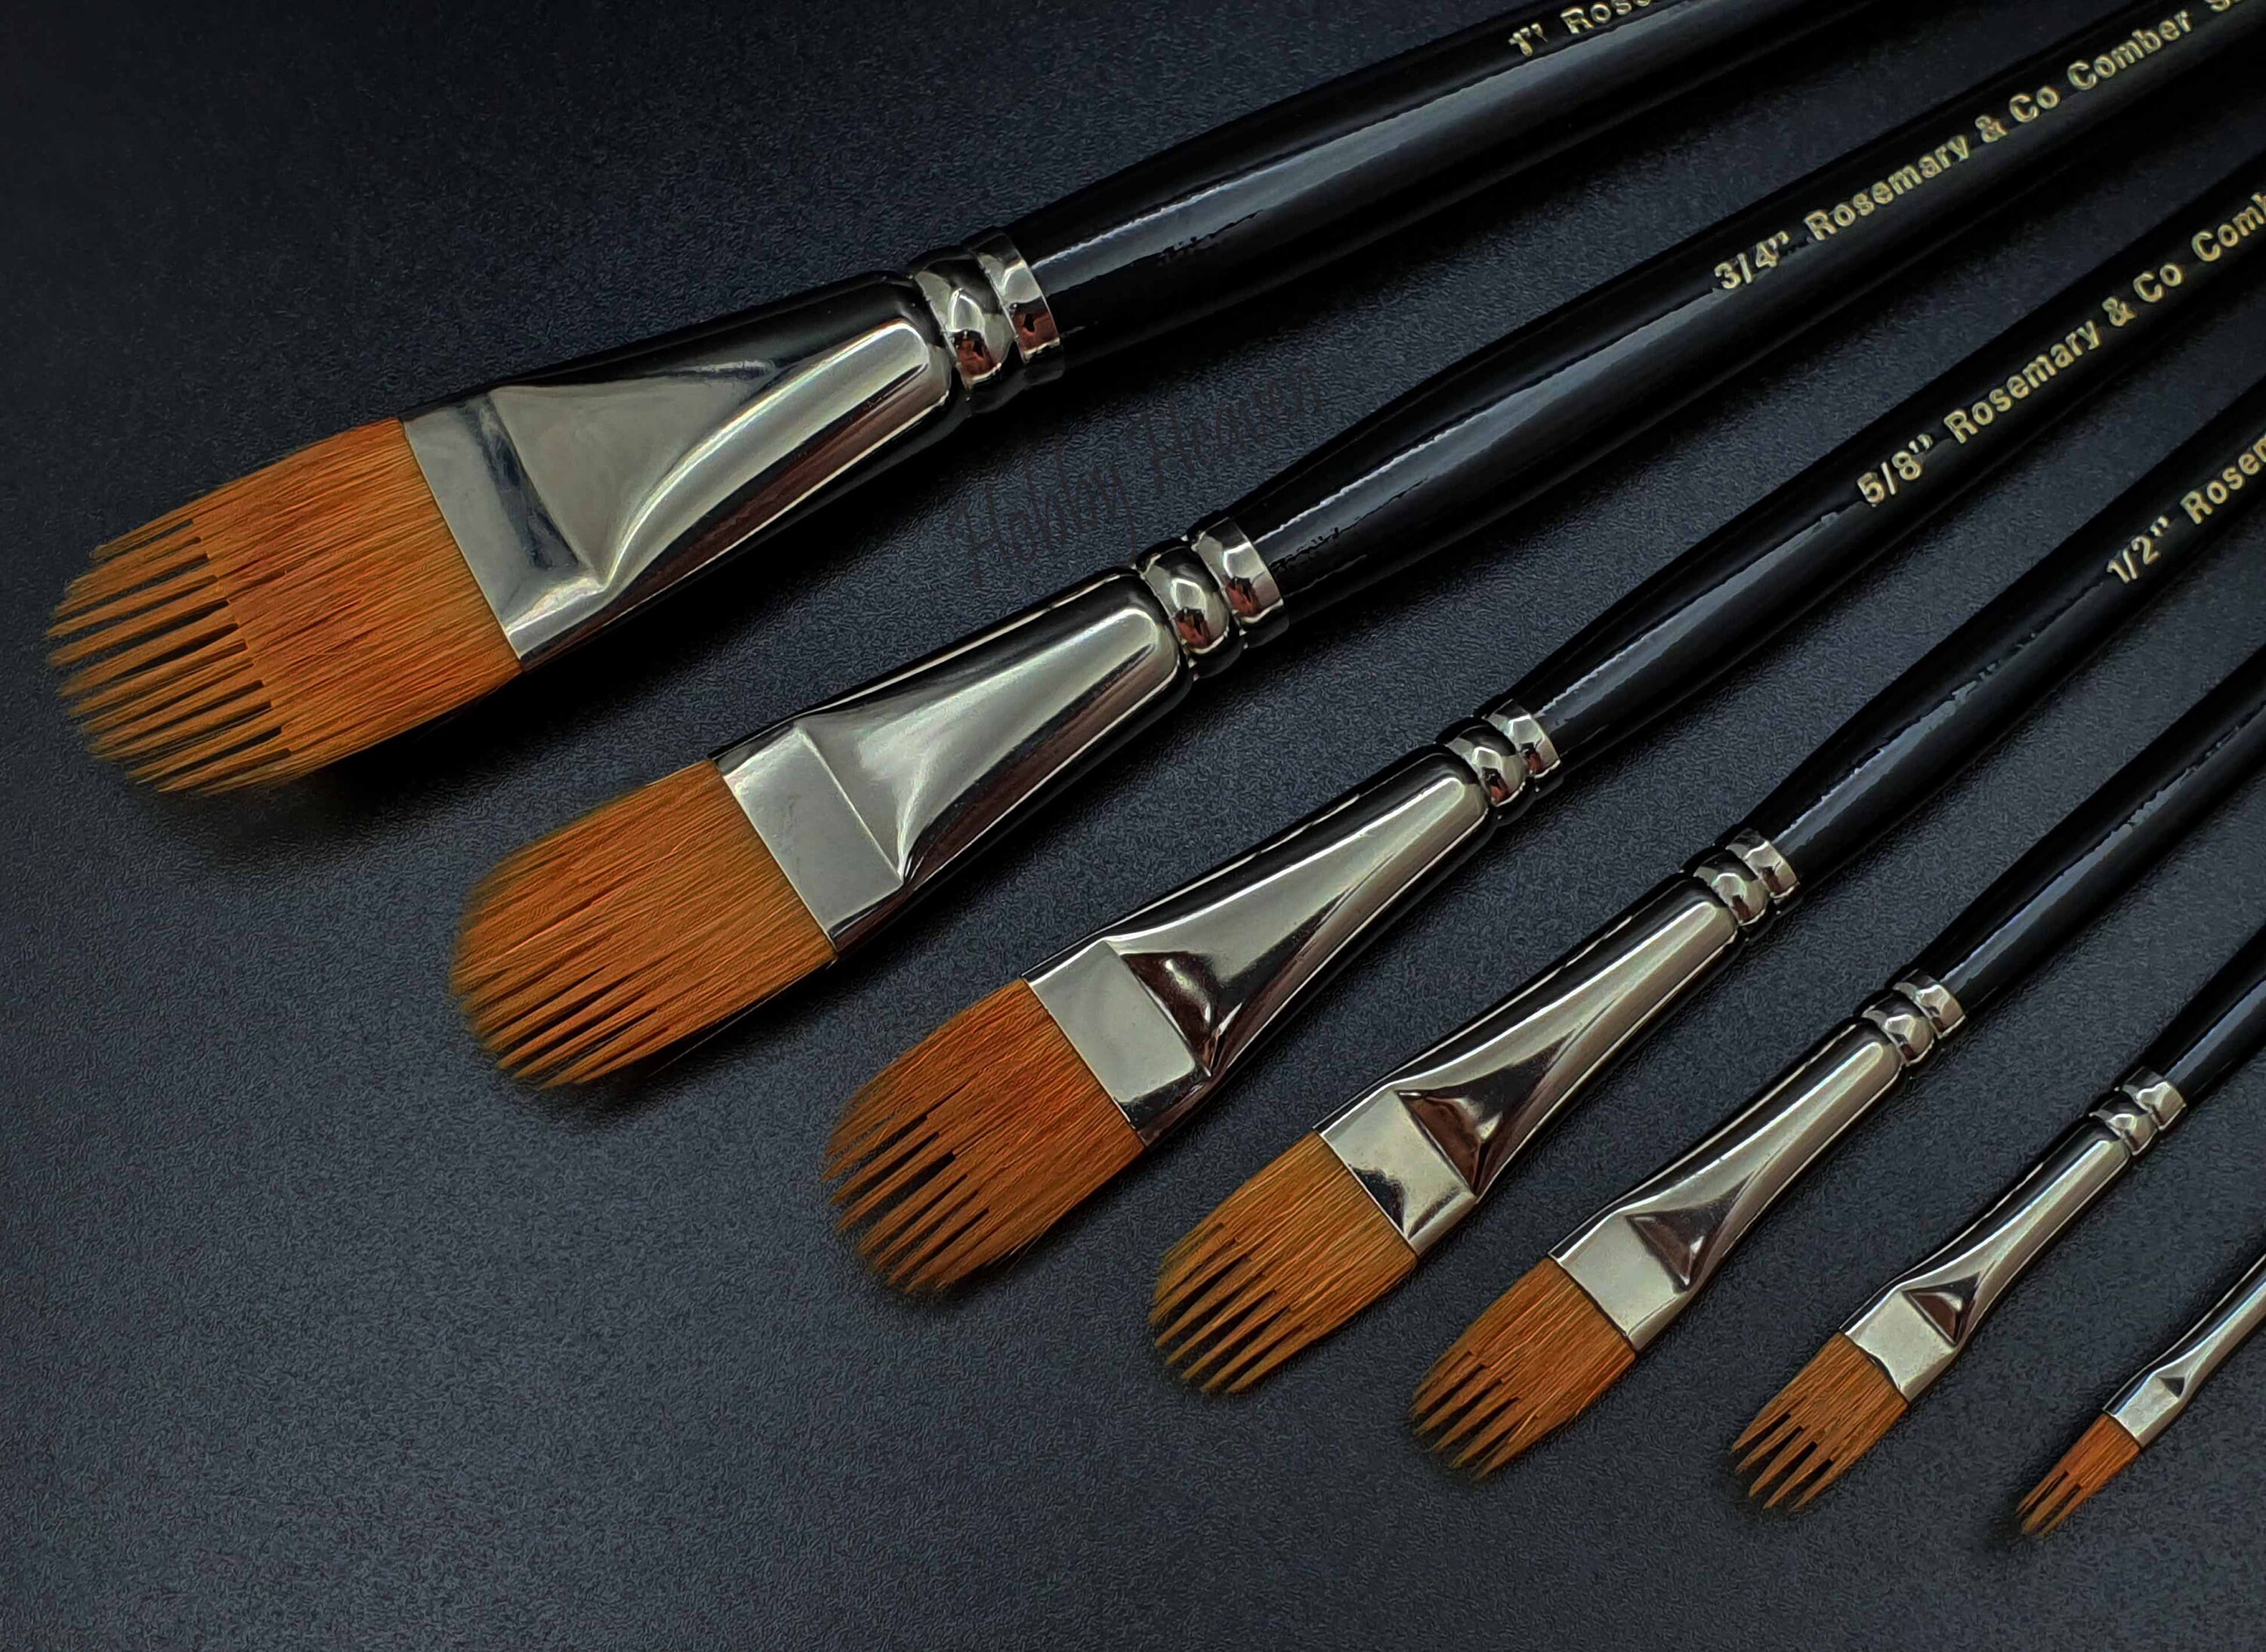 The Importance of QualitY: Rosemary & Co Brushes